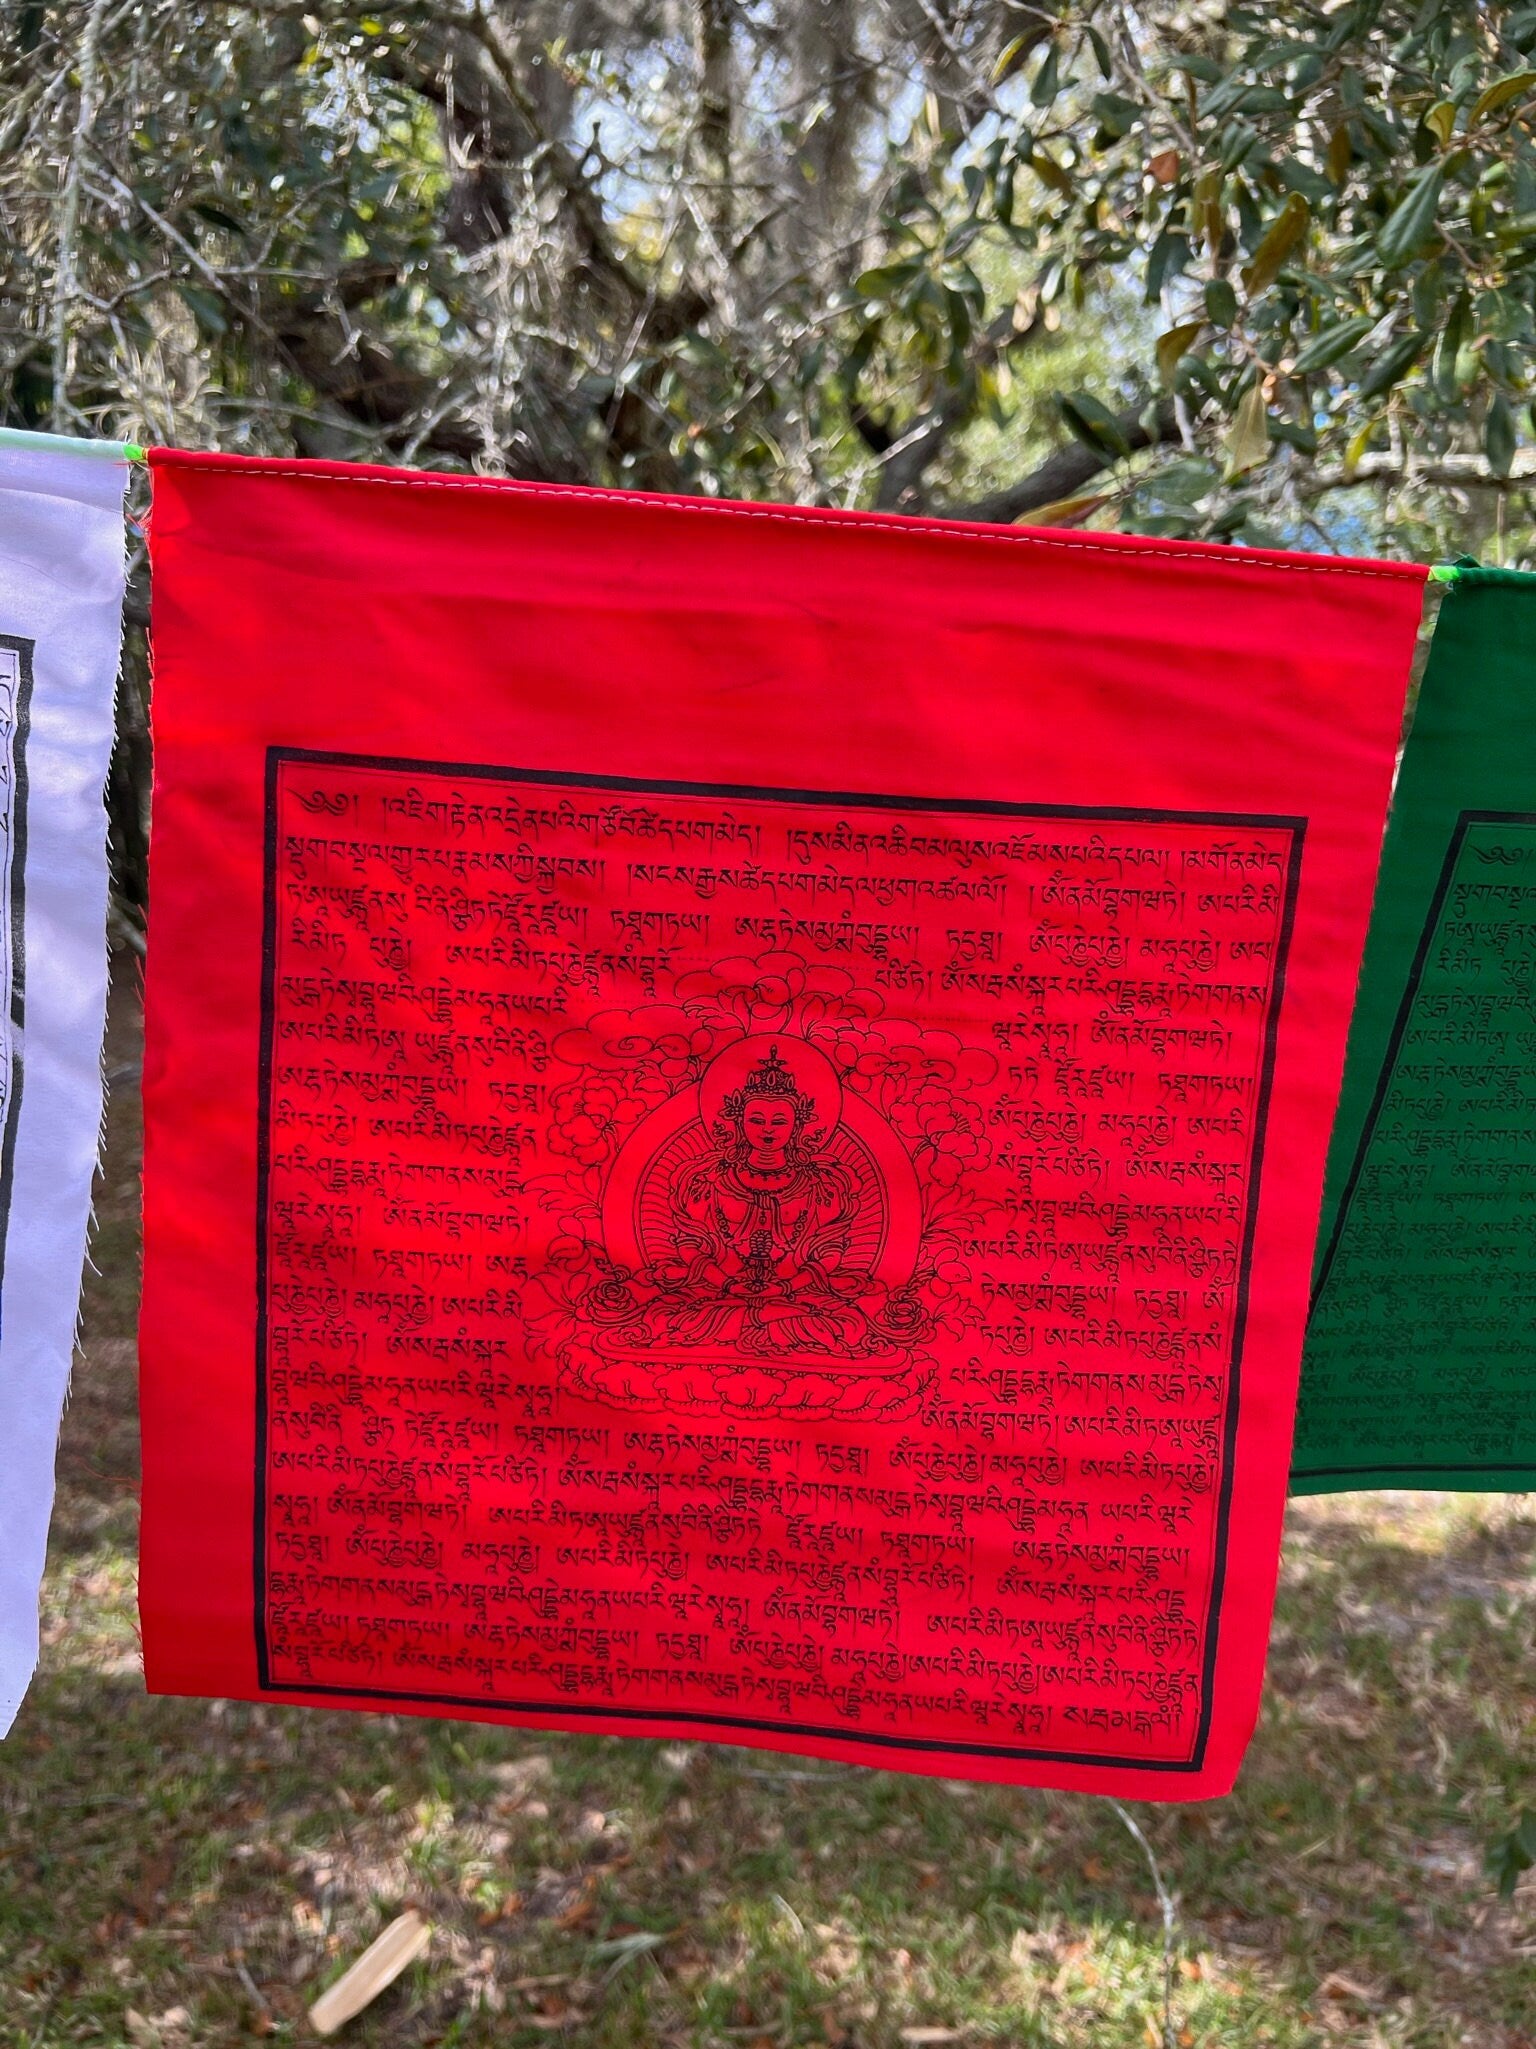 Close-up of red Amitayus flag from a set of 25, featuring central deity image surrounded by Tibetan prayers, symbolizing purity and longevity.